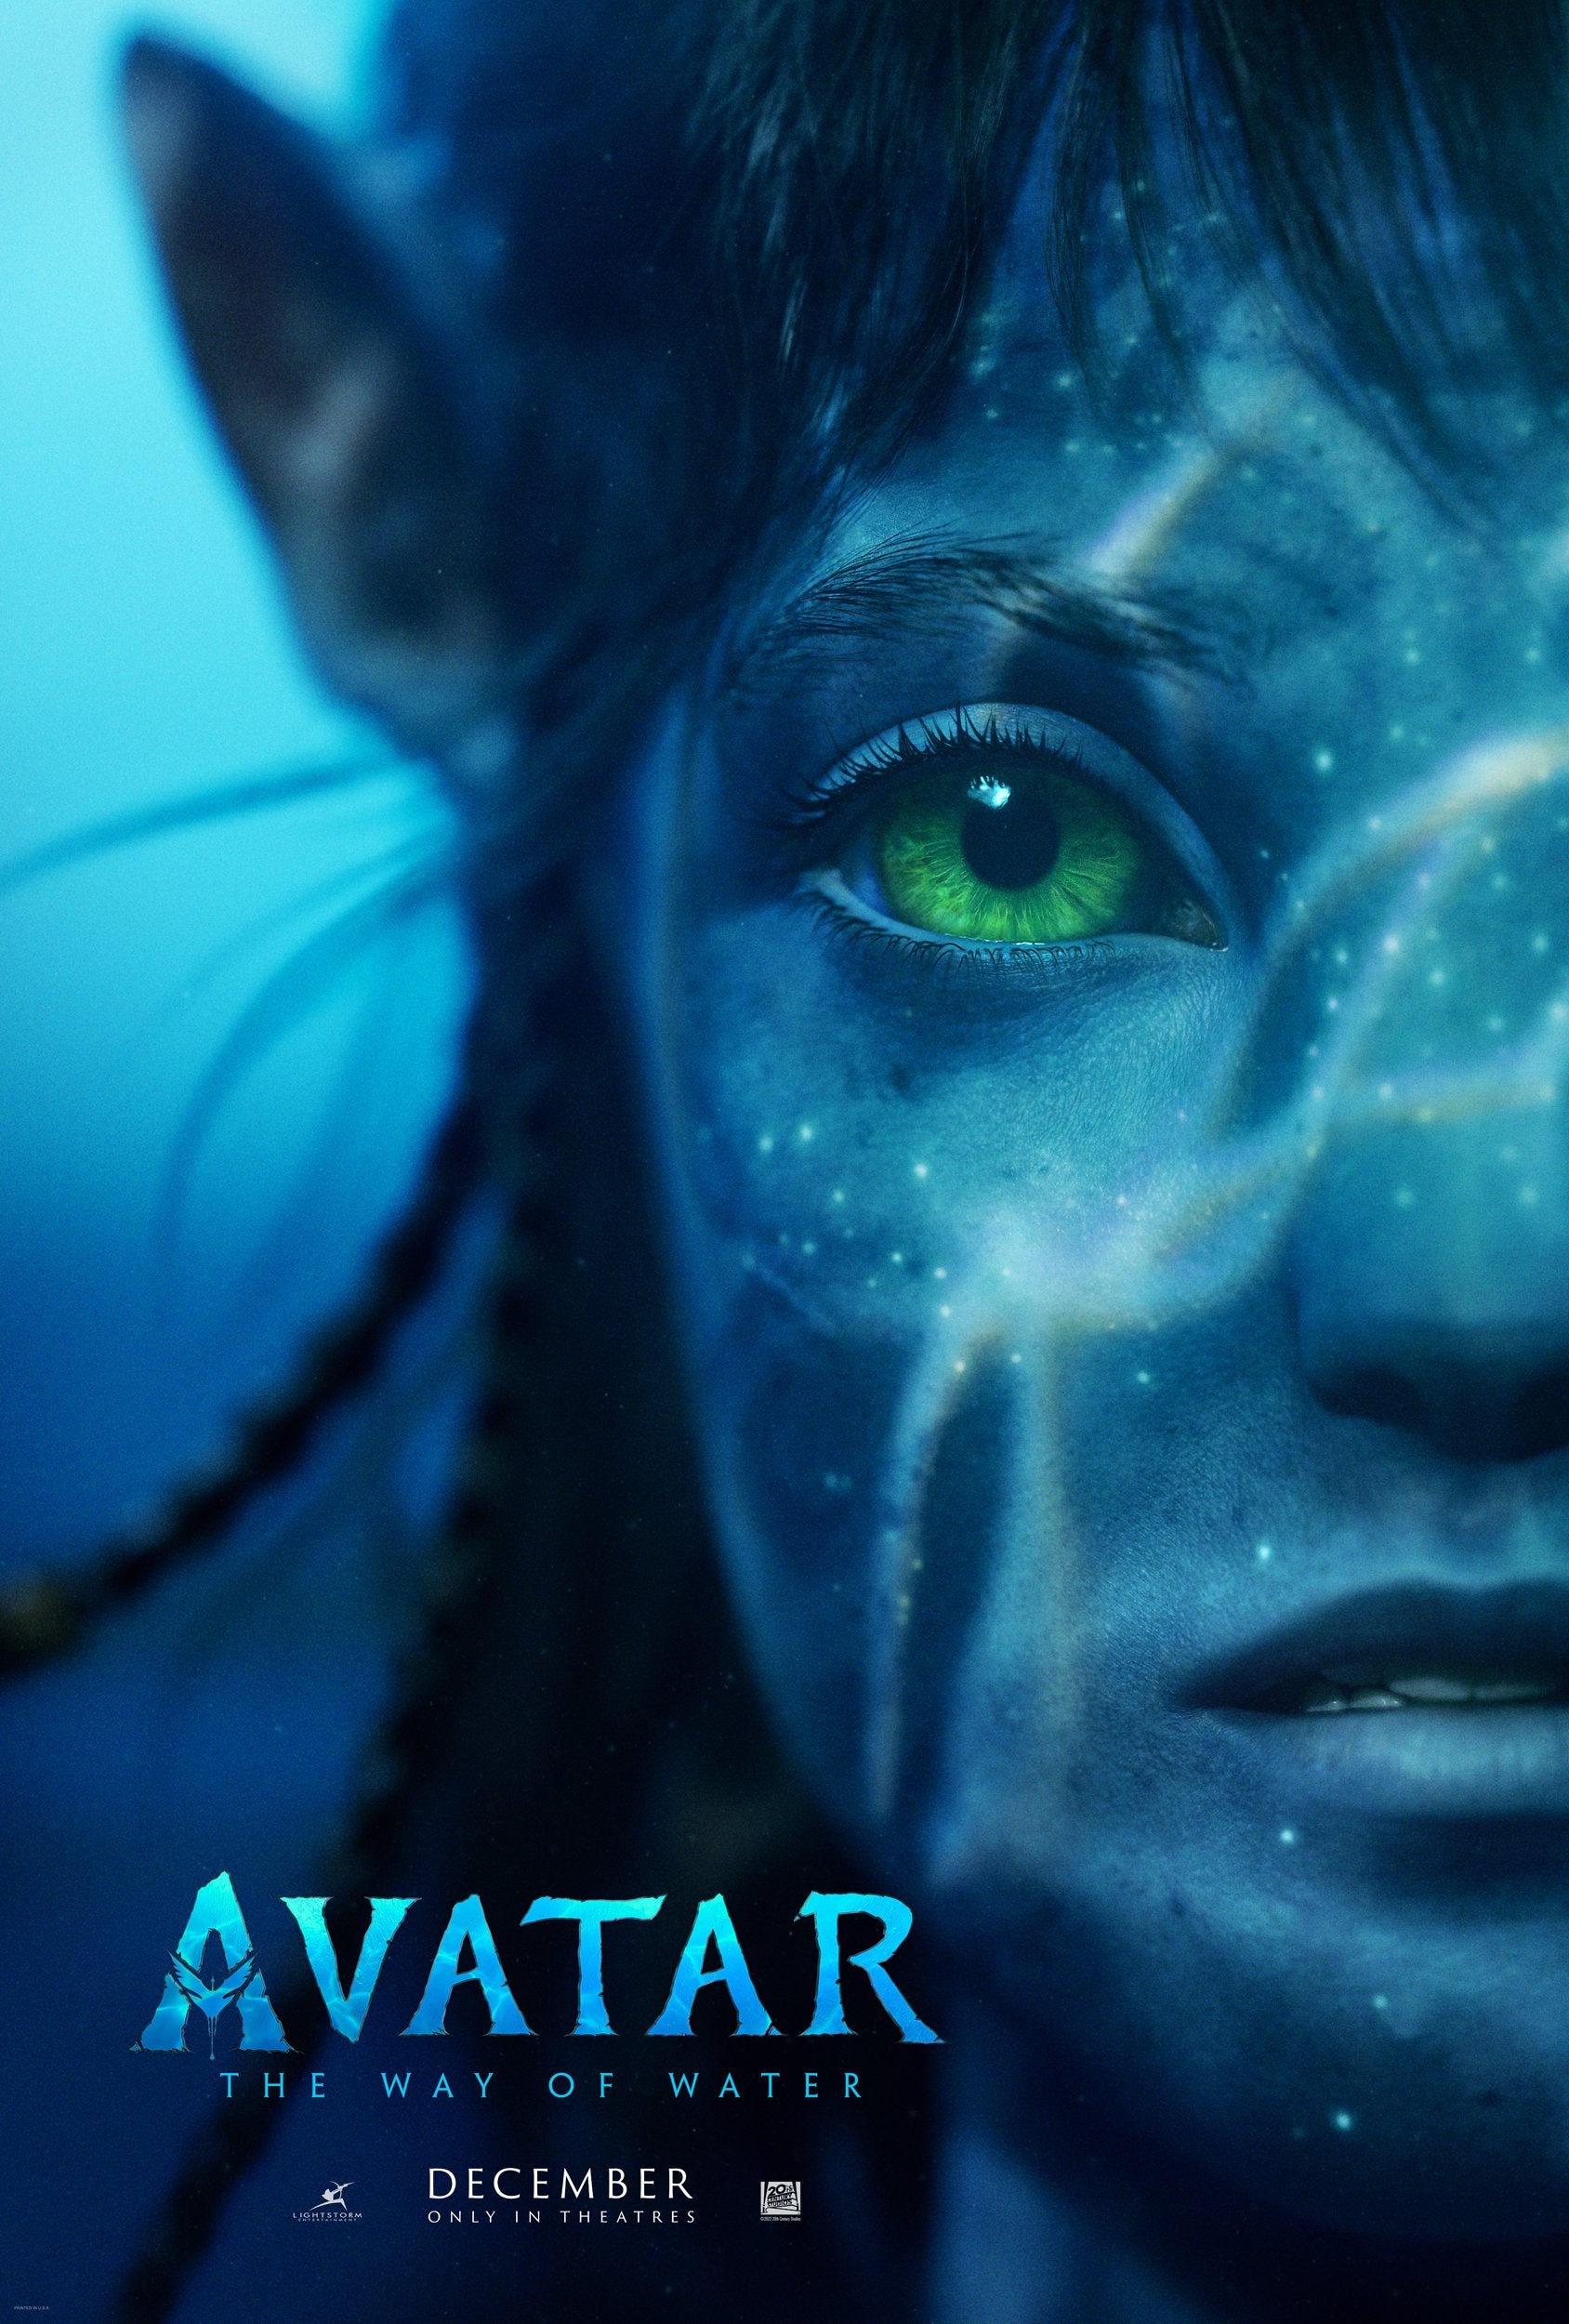 Avatar The Way of the Water Teaser Poster